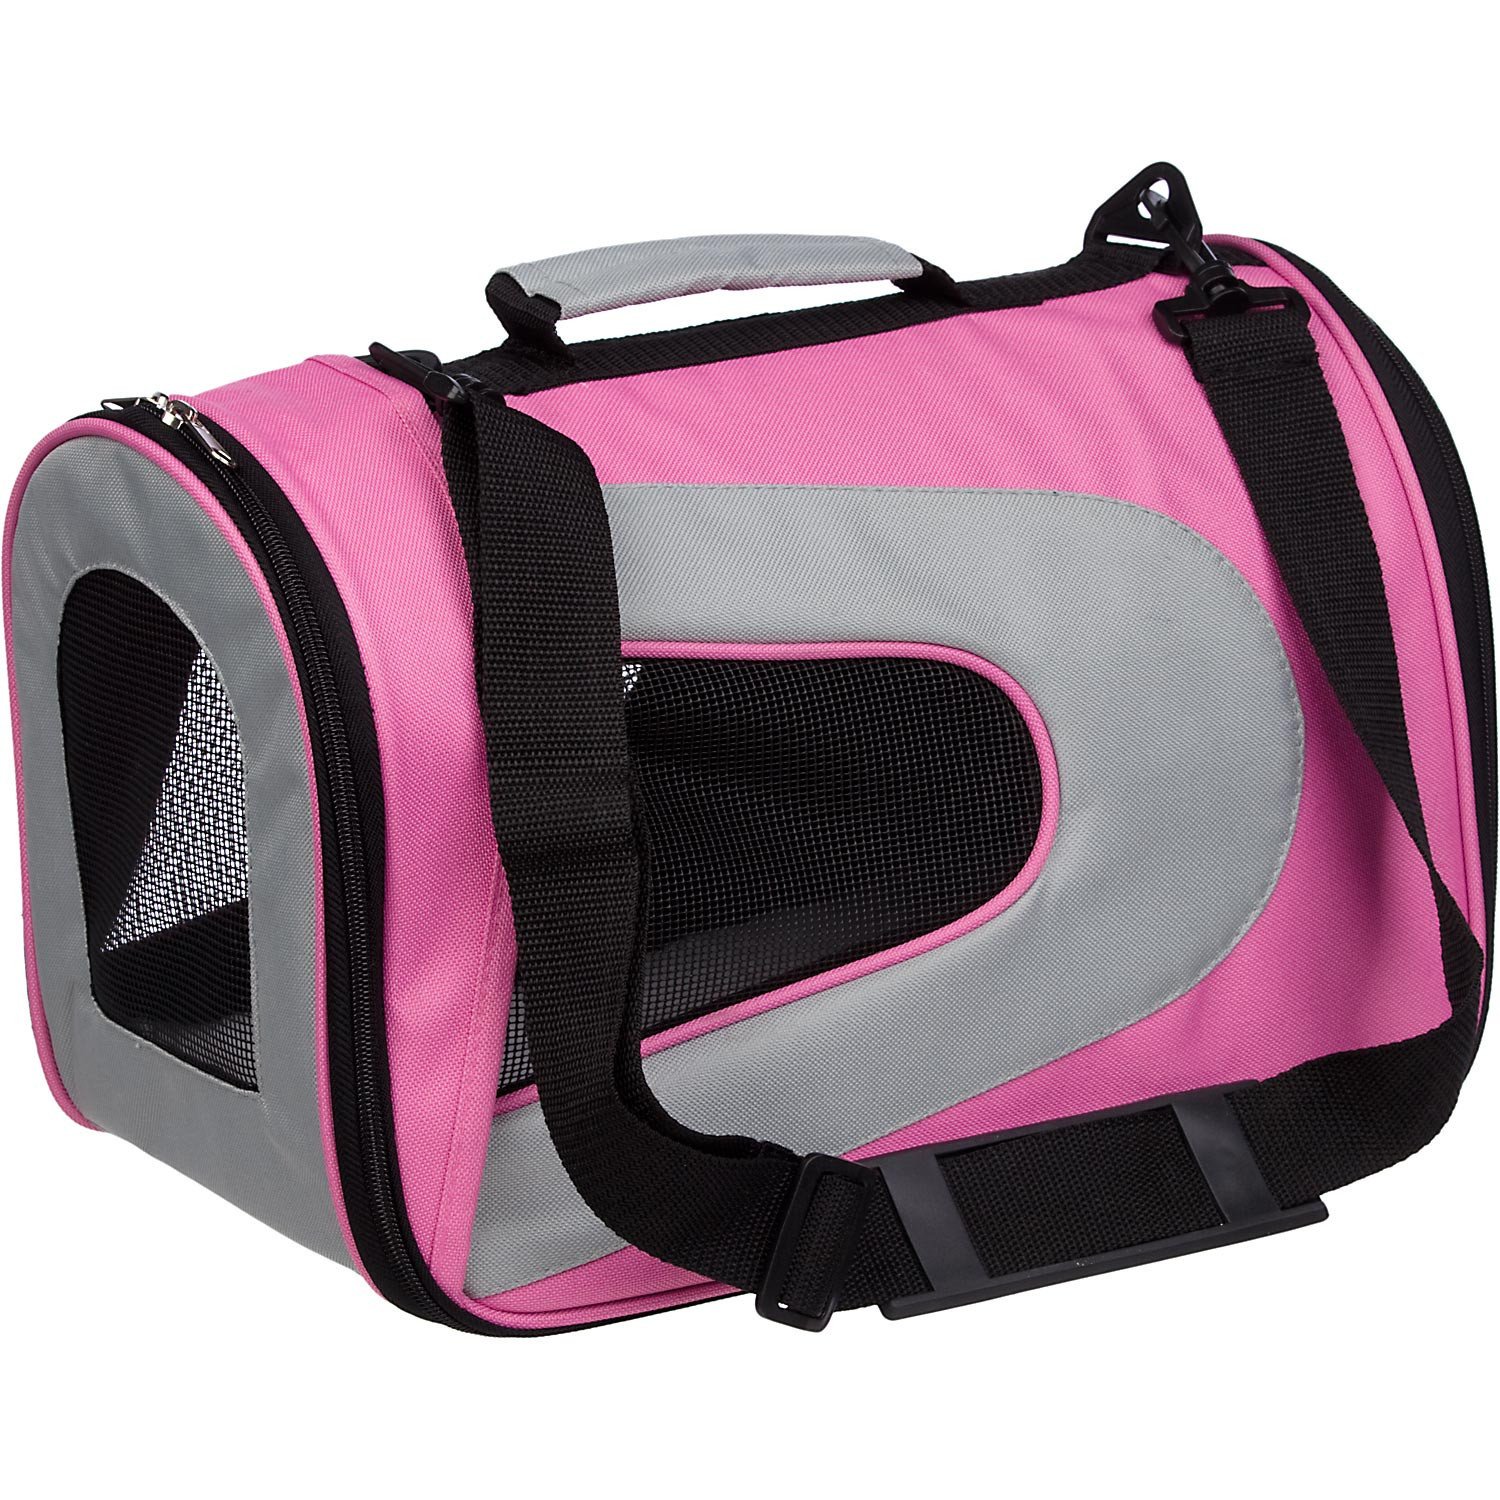 Airline Approved Folding Zippered Sporty Mesh Pet Carrier - Pink 